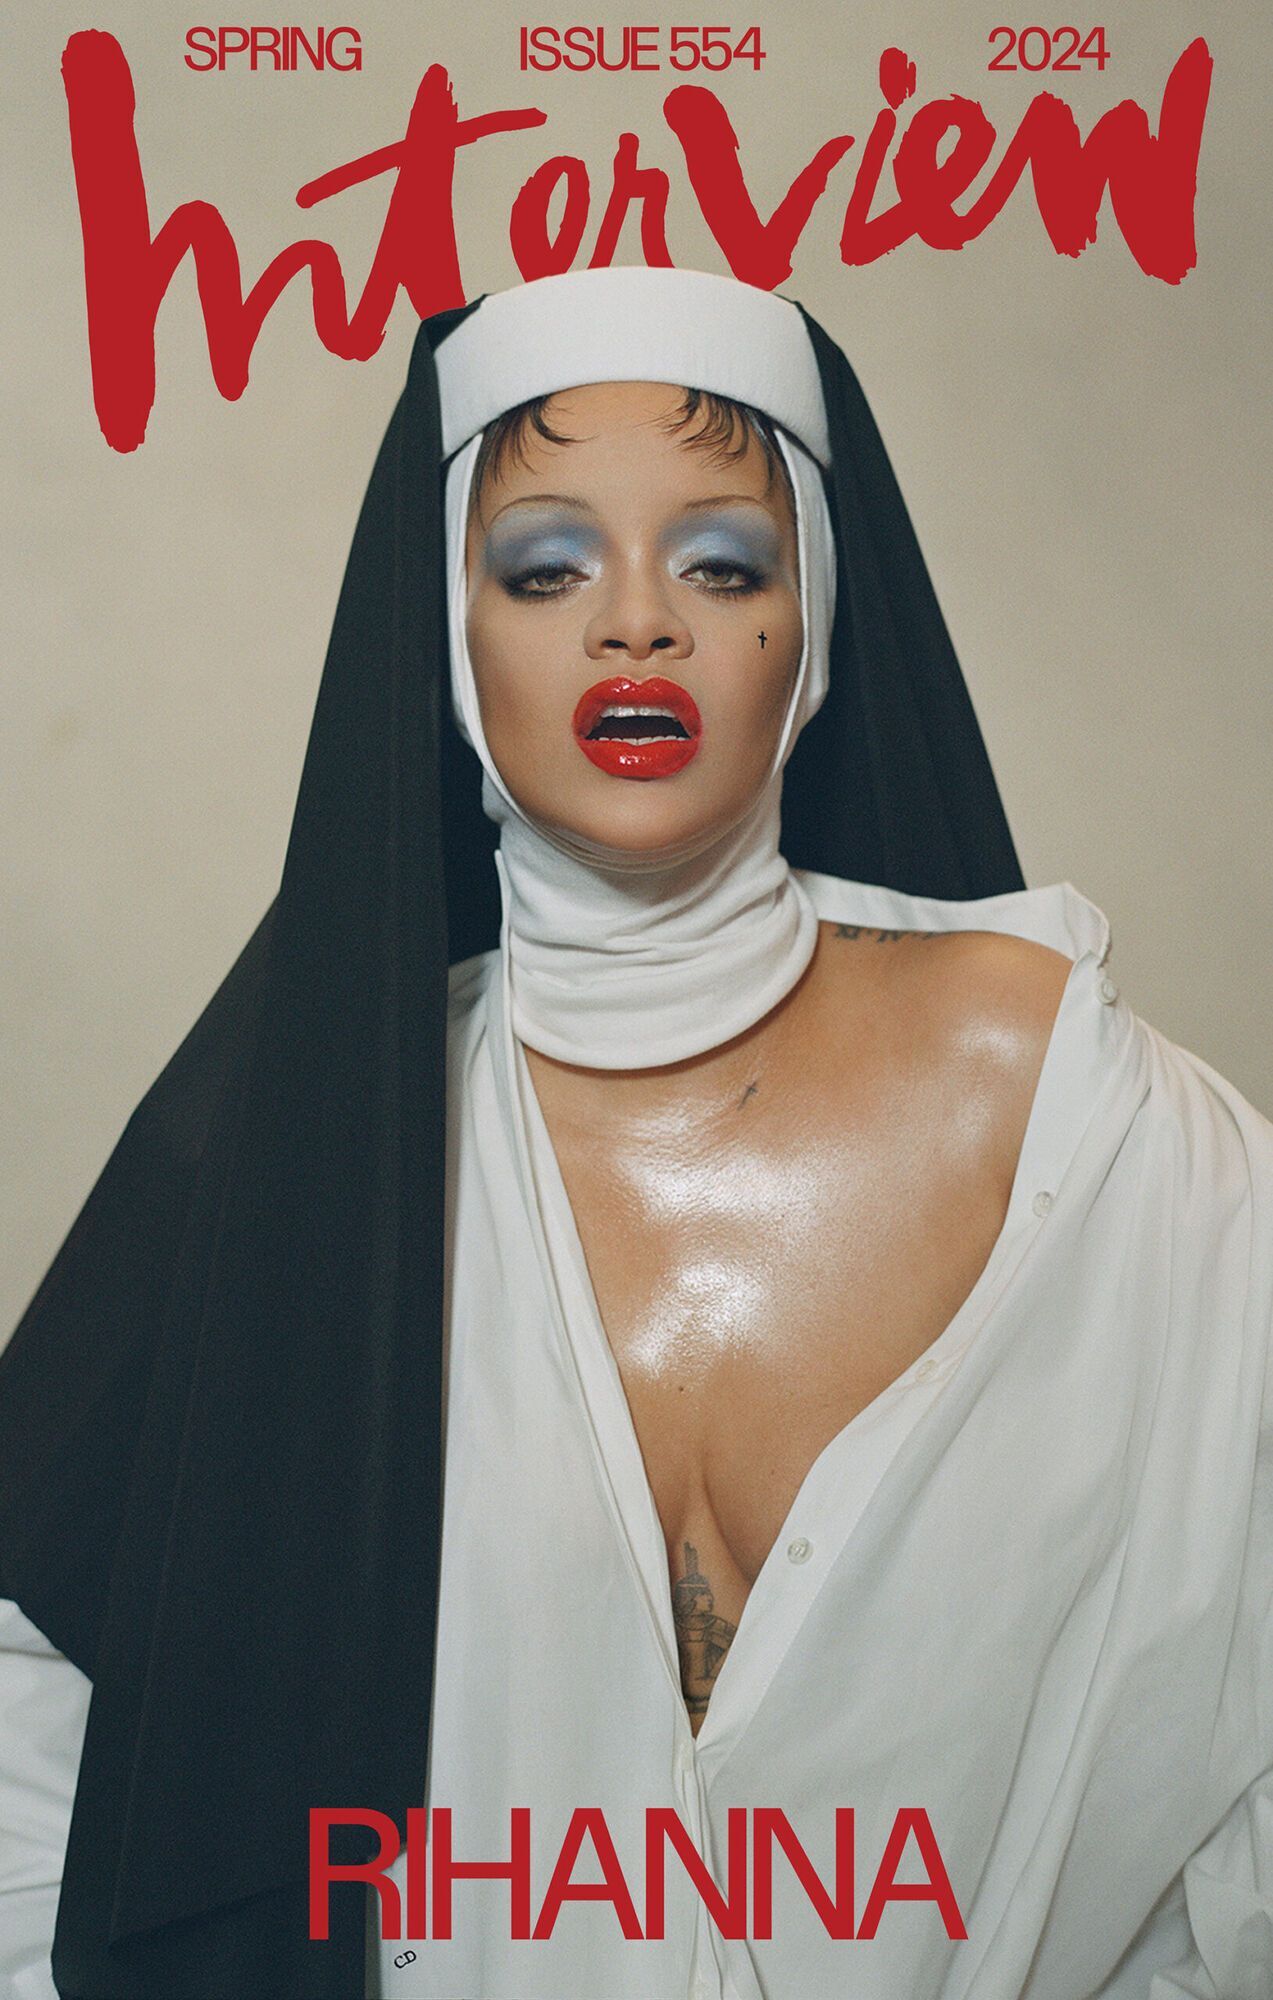 ''Why mock religion?'' Rihanna was criticized for her frank image of a nun